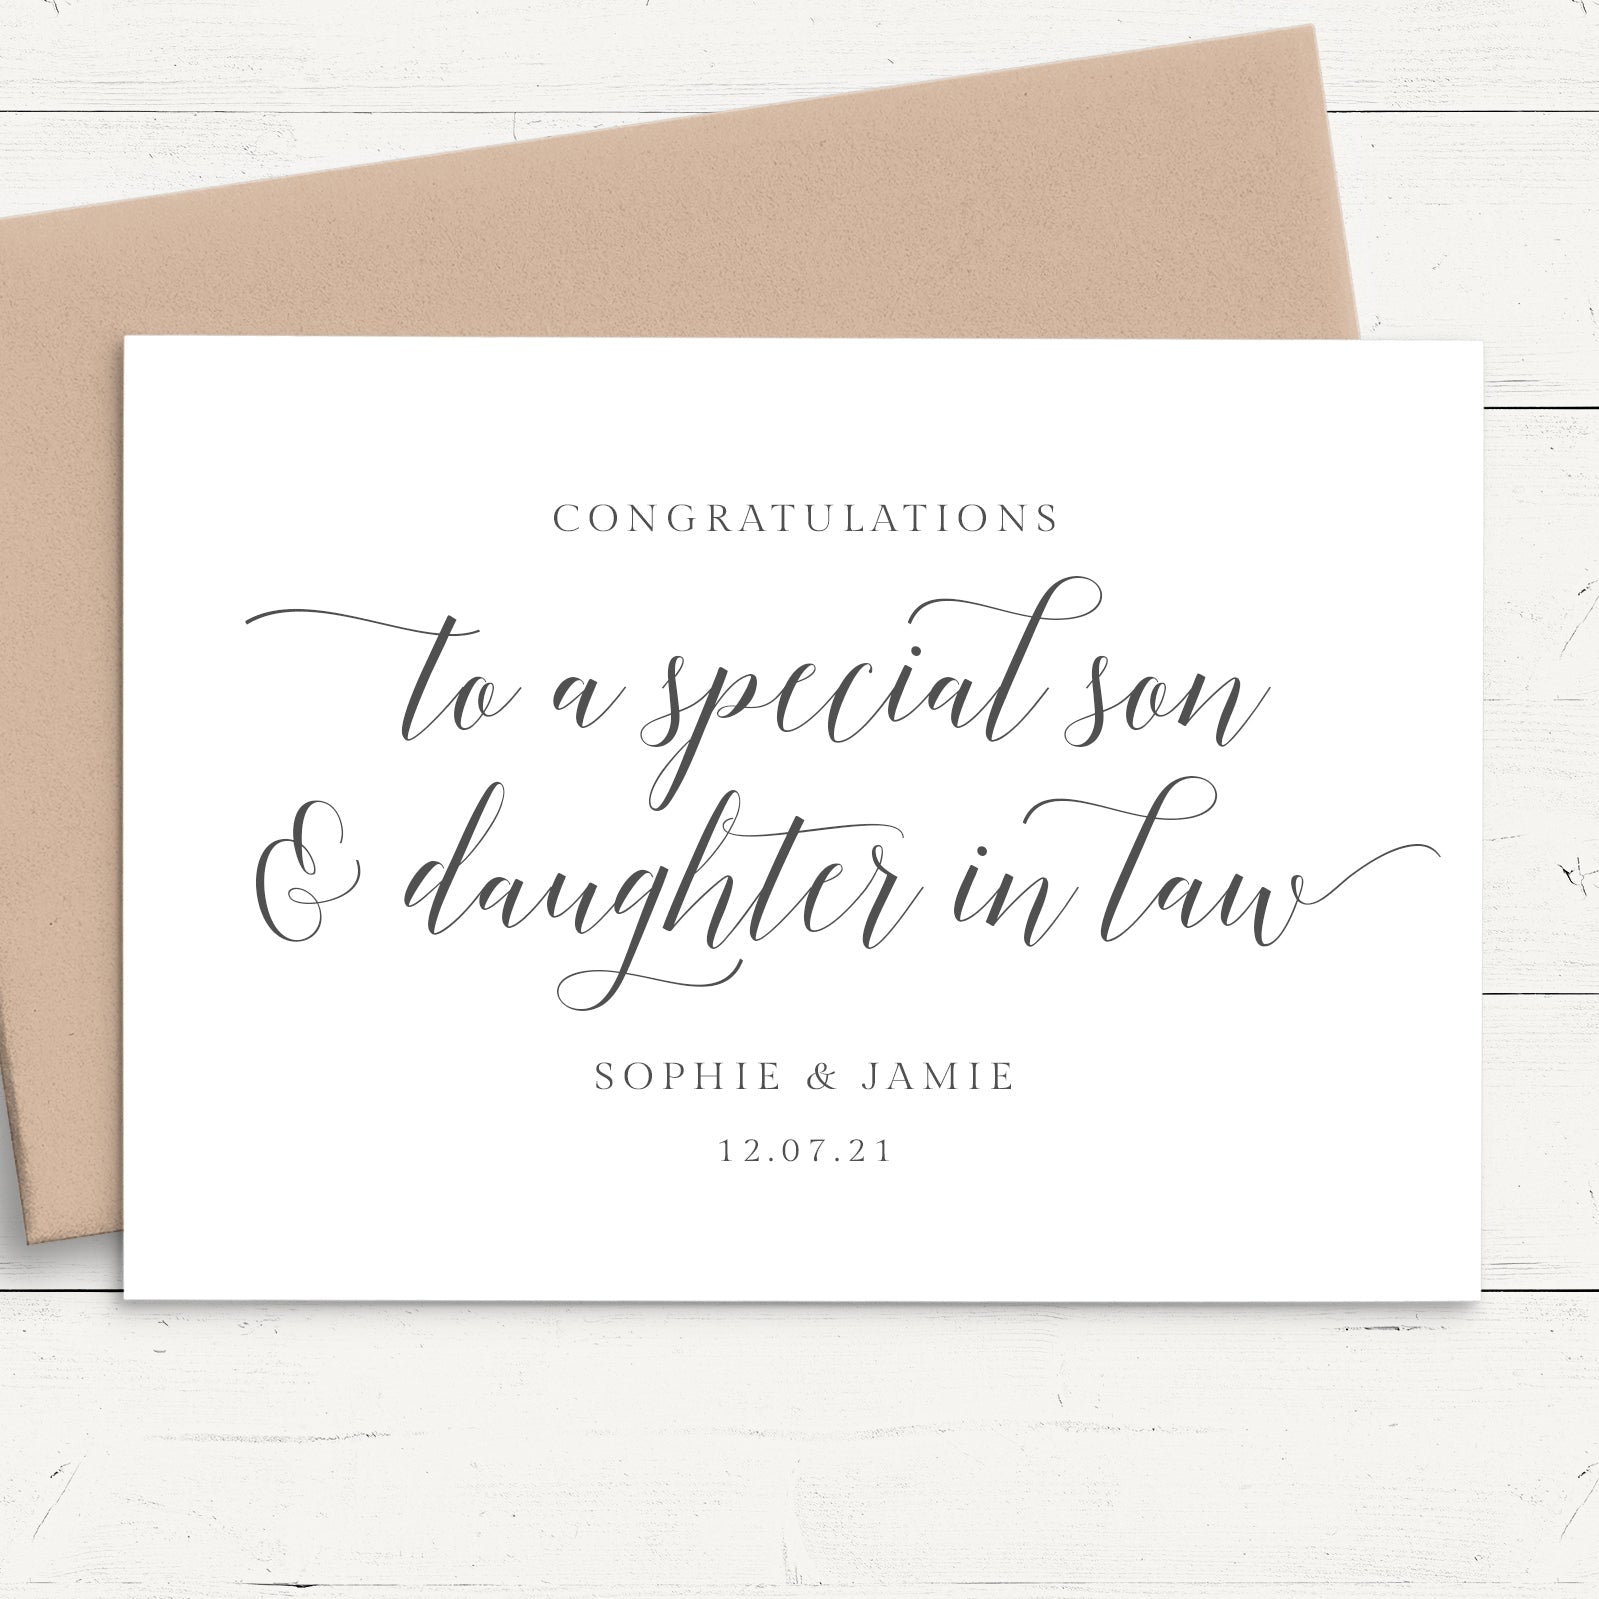 black and white modern script wedding card for son and daughter in law personalised matte smooth white cardstock kraft brown envelope